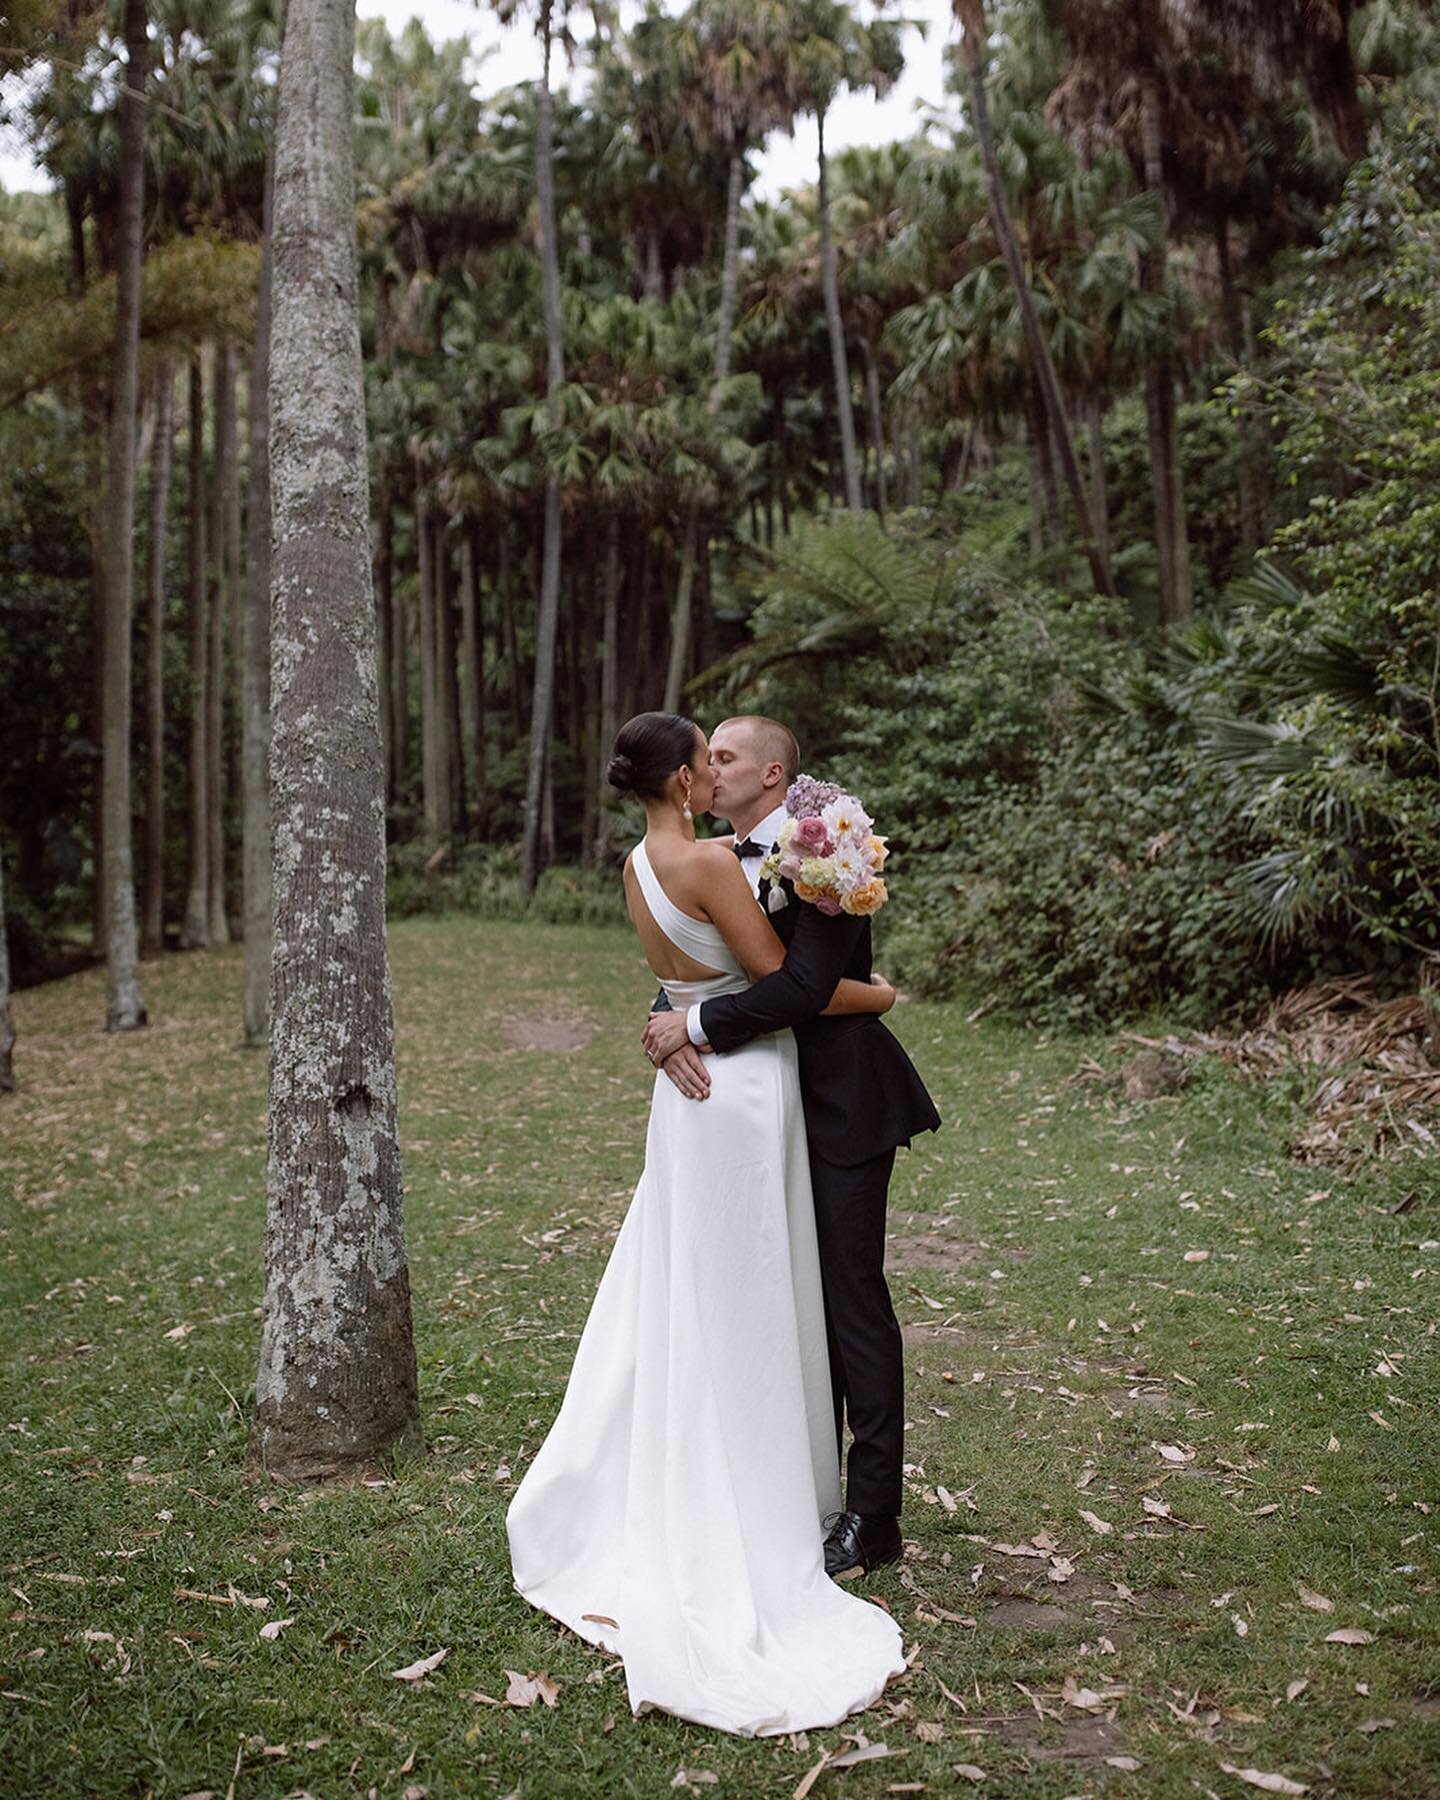 Magic moments for these two beautiful people this weekend 🌸

Amongst the spring flowers and the Palm trees, these two tied the knot beach side and then stepped across to Dunes for a reception filled with delicious food, fabulous drinks and an all st